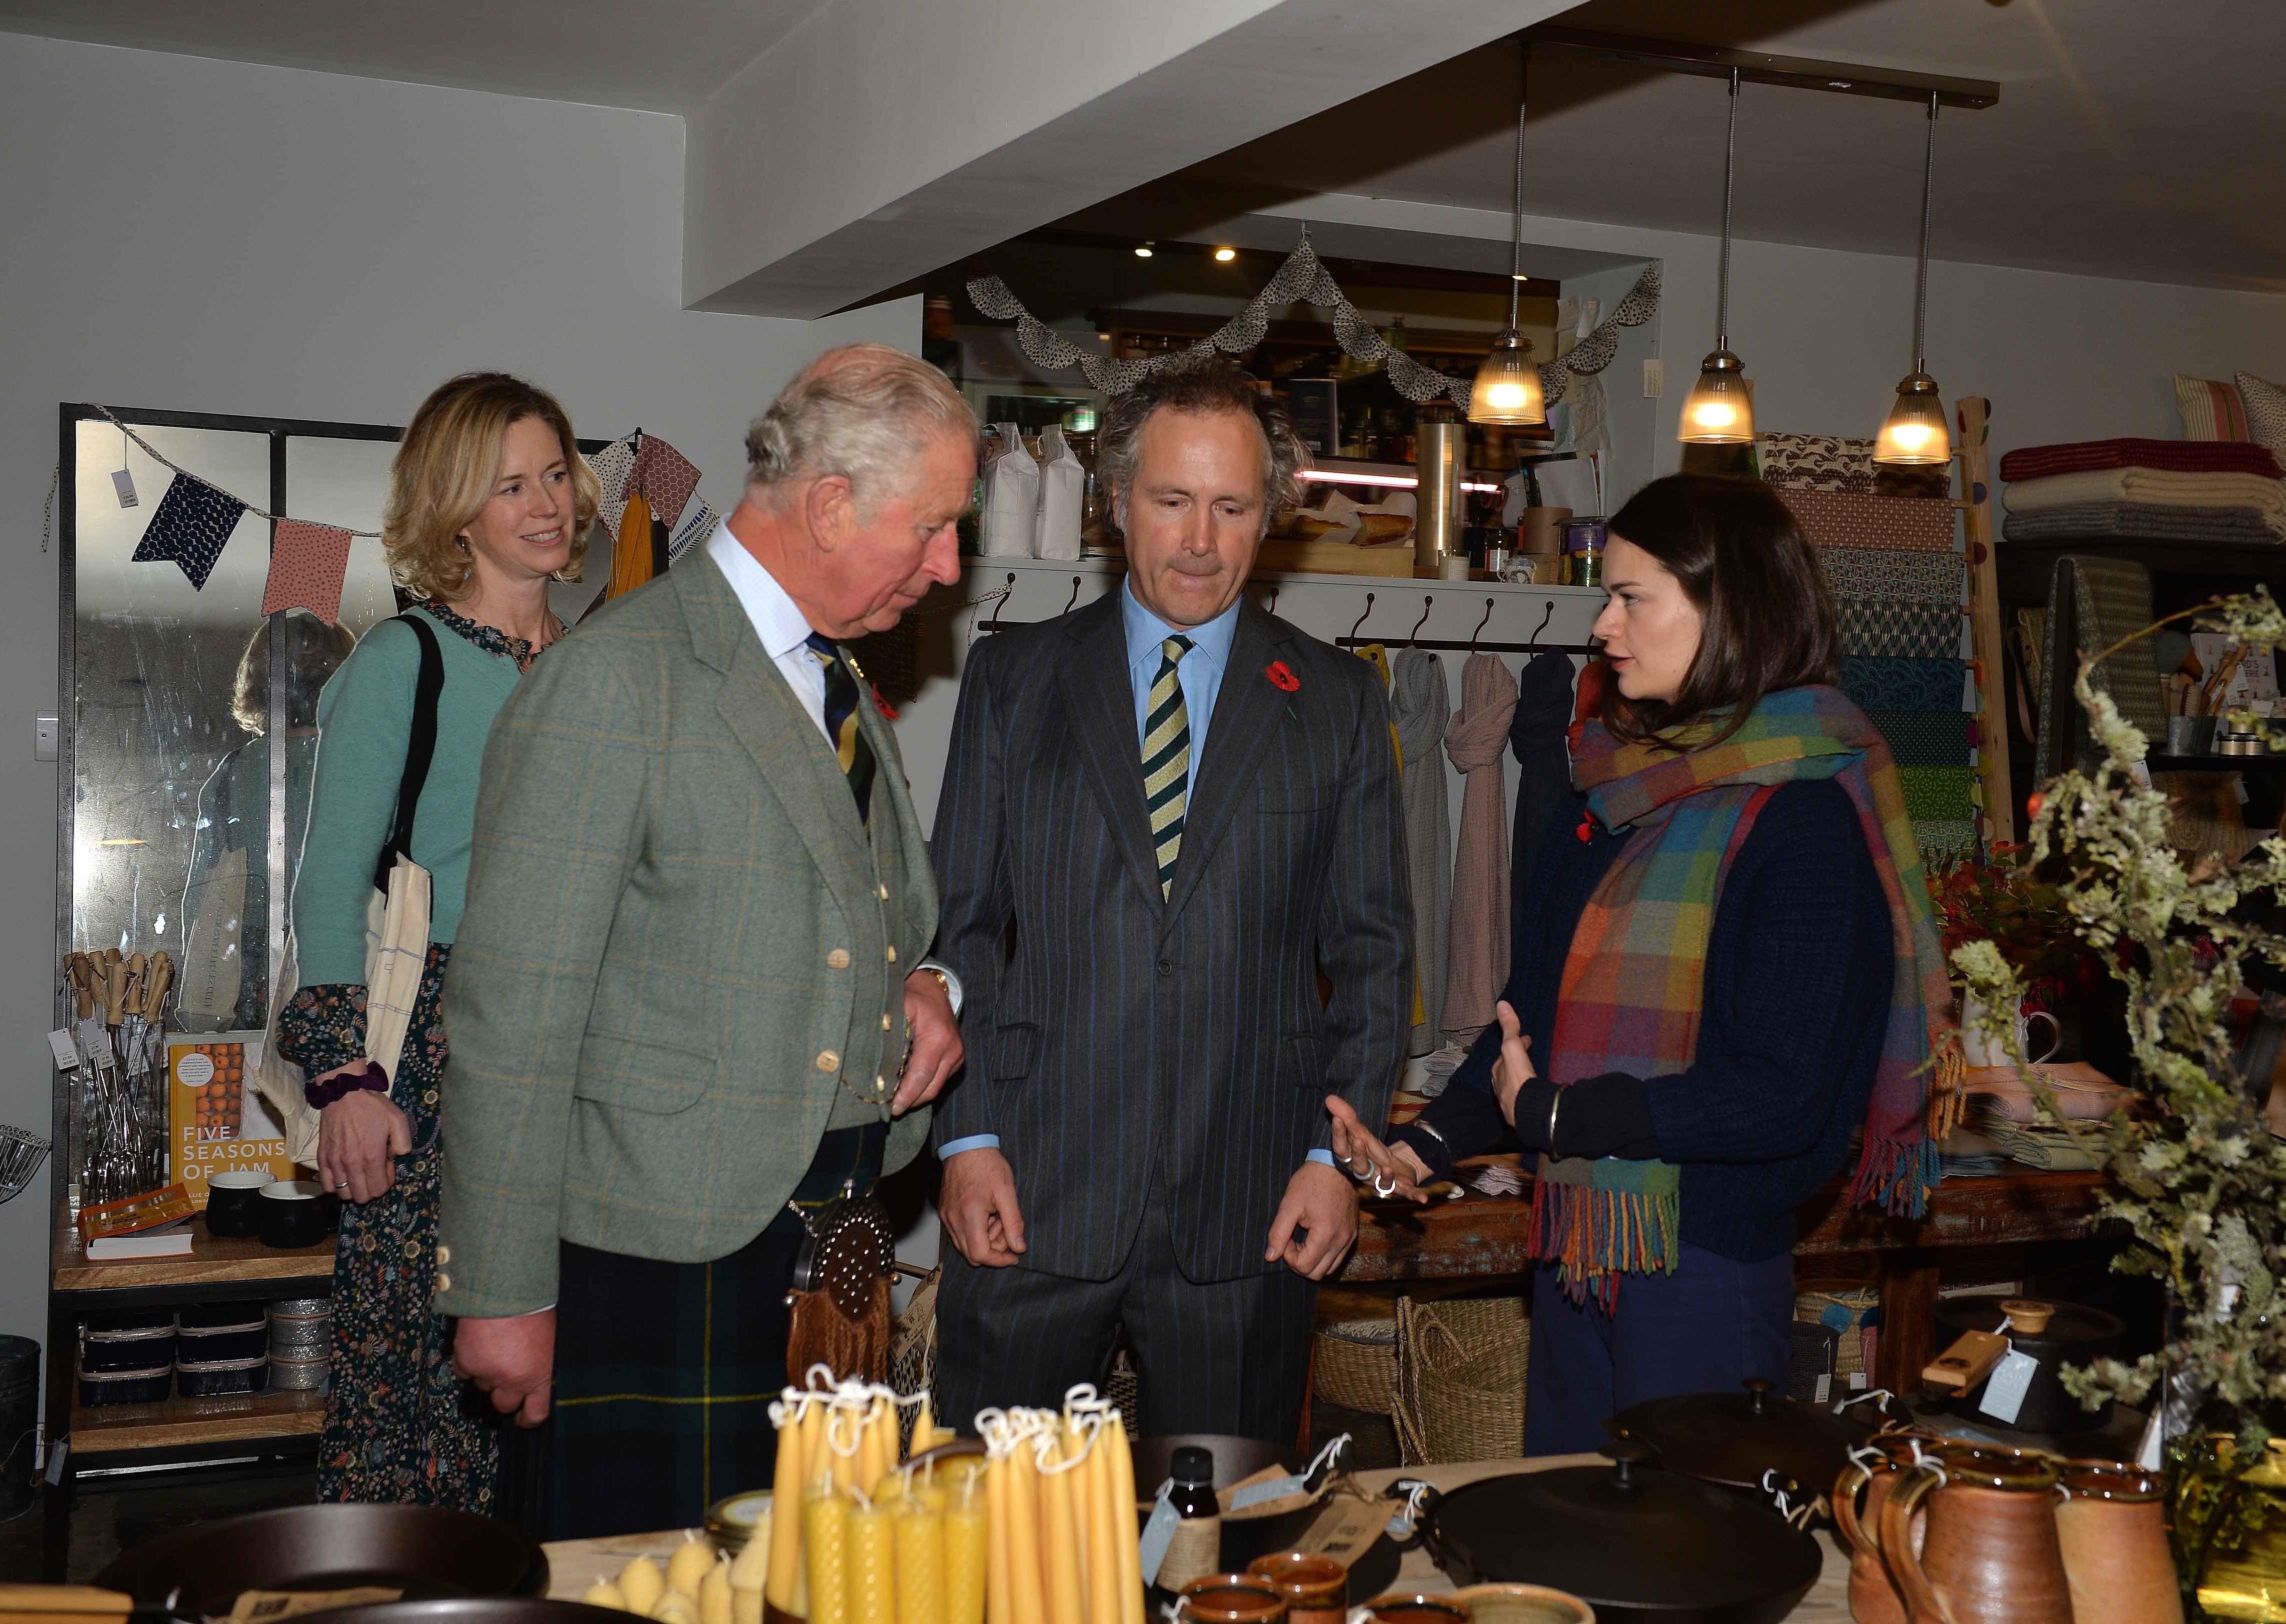 Phillippa Henley shows the Duke of Rothesay around the home ware area of Mainstreet Trading Company.